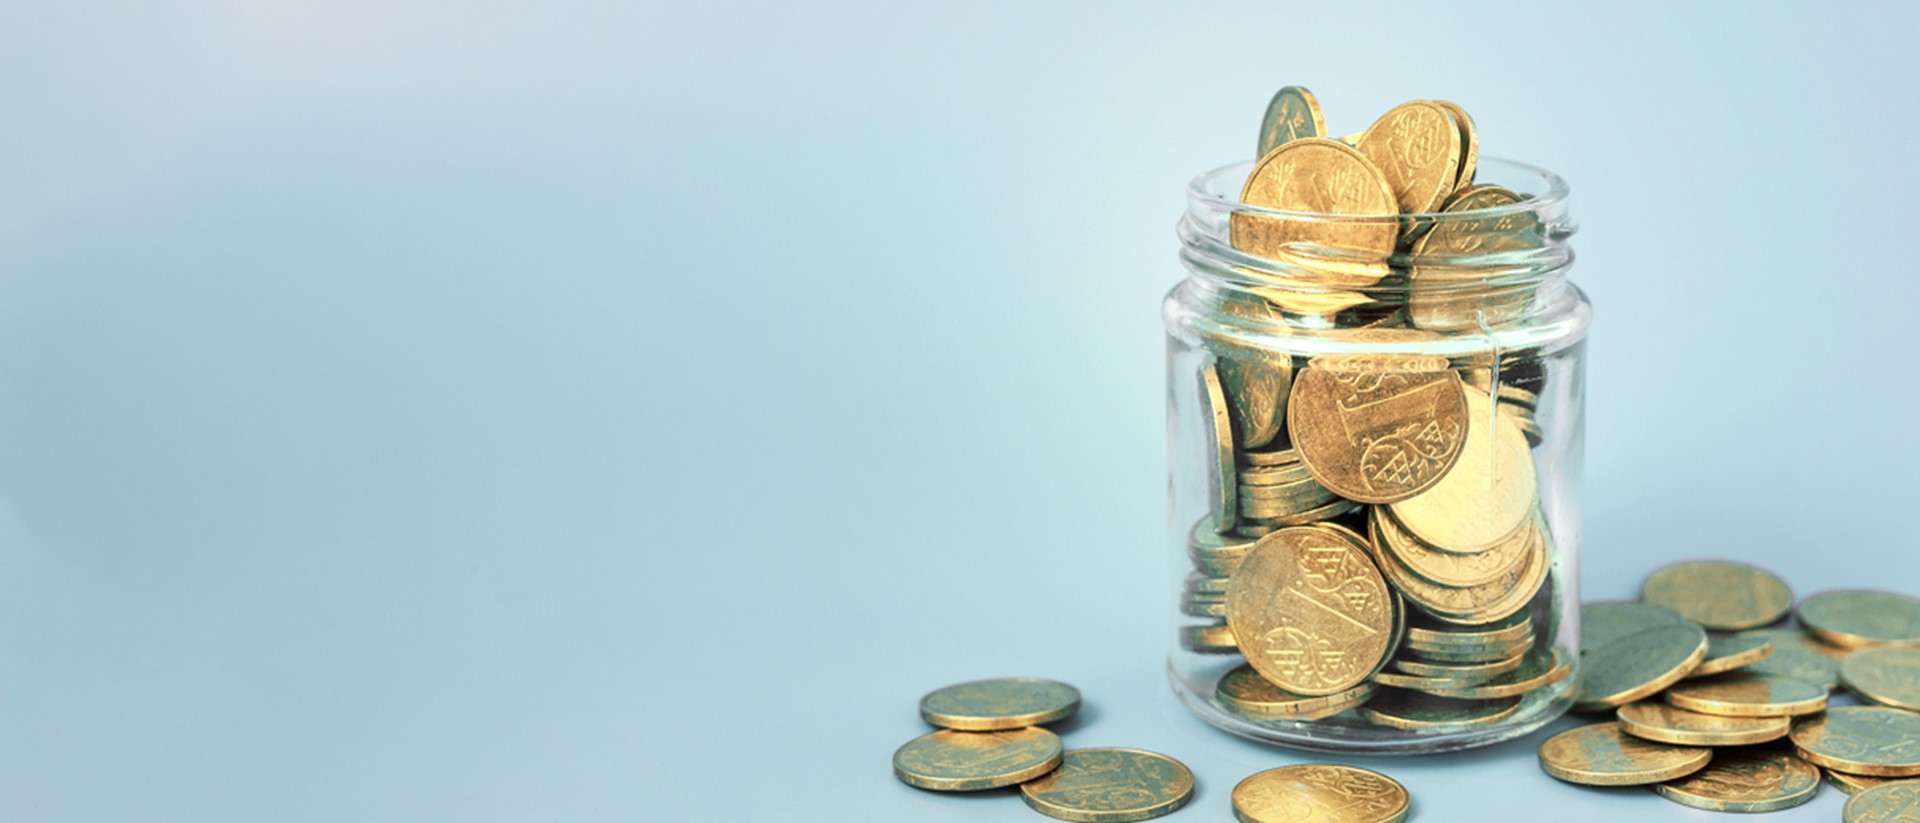 Image of coins in a glass jar on a blue background